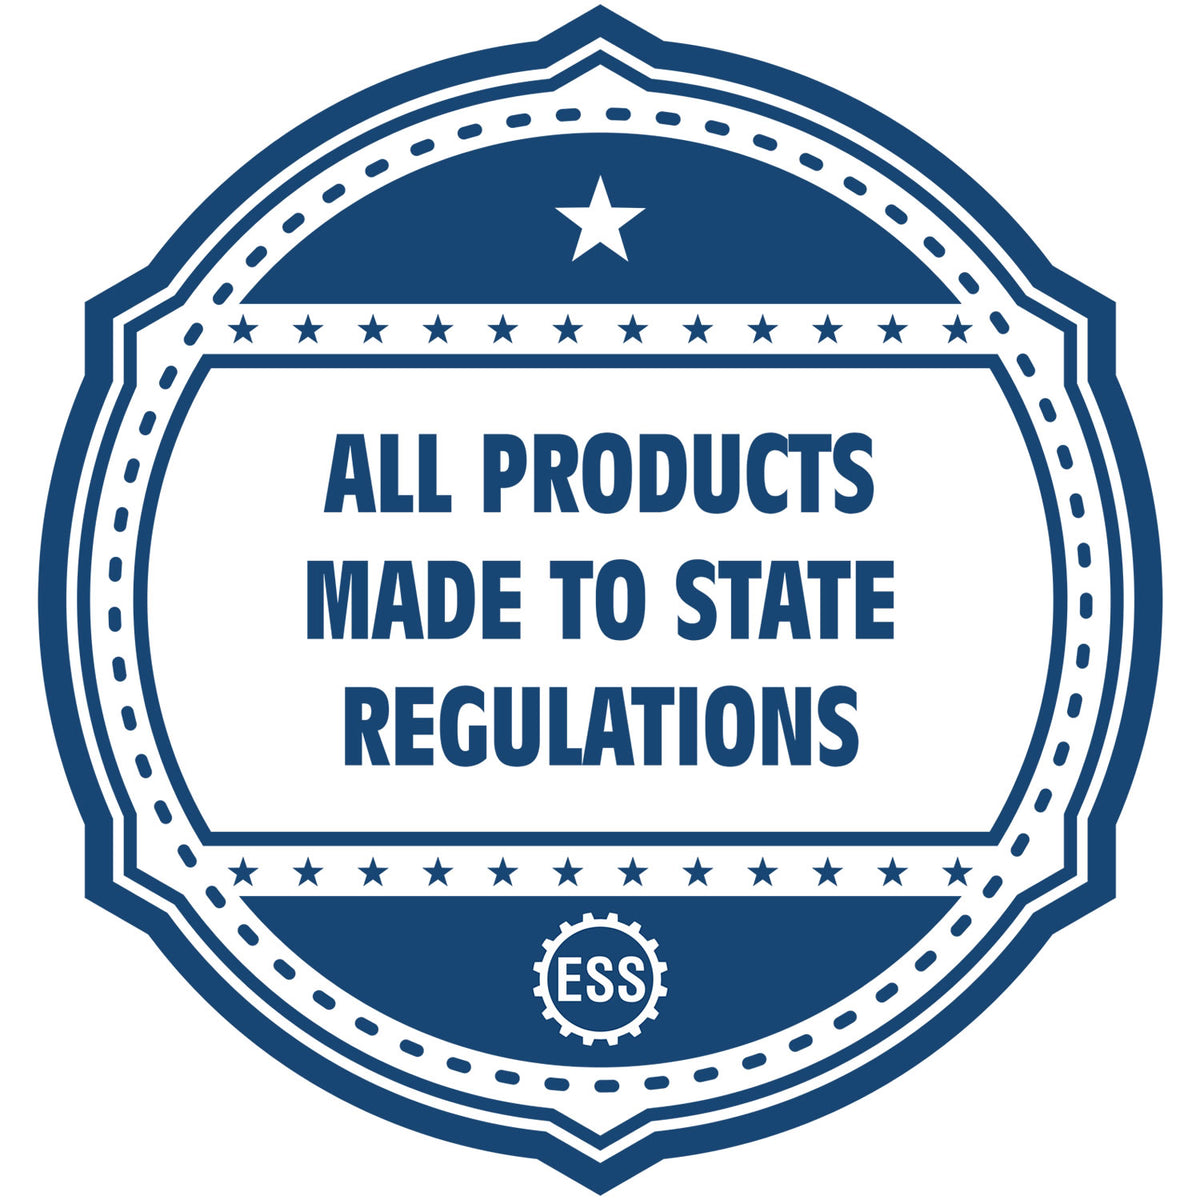 An icon or badge element for the Heavy-Duty South Dakota Rectangular Notary Stamp showing that this product is made in compliance with state regulations.